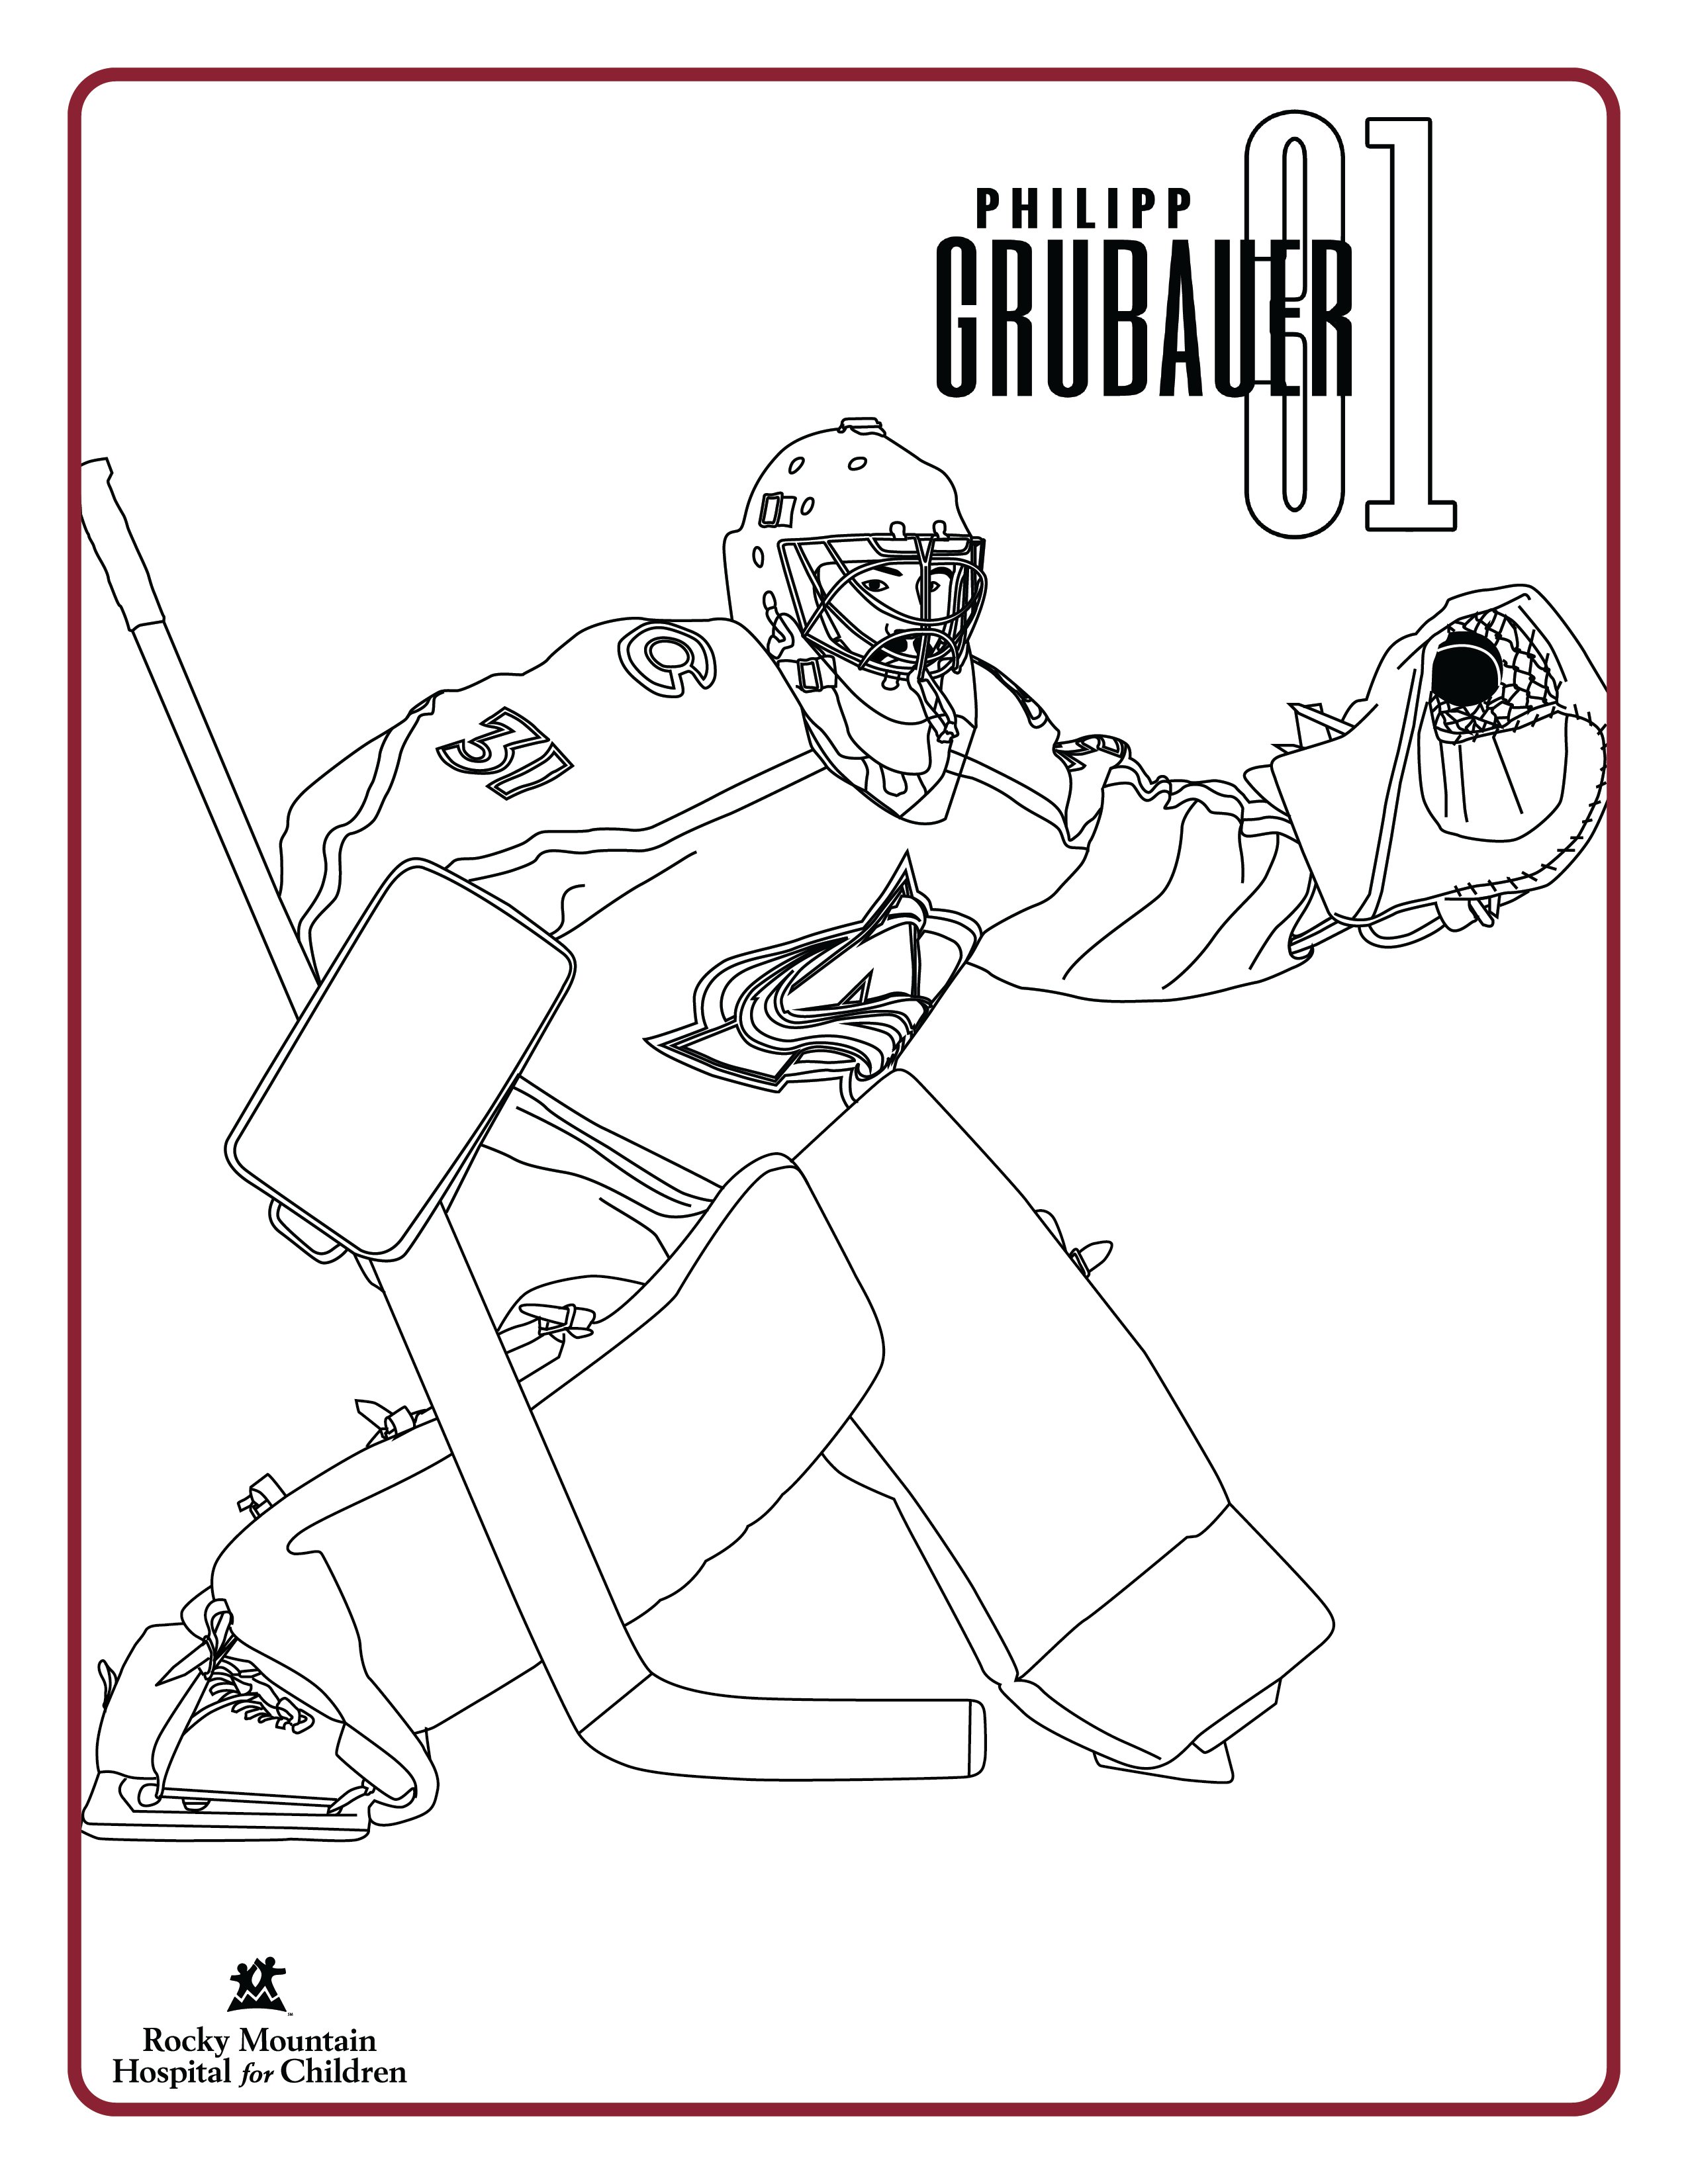 Colorado Avalanche Logo coloring page from NHL category. Select